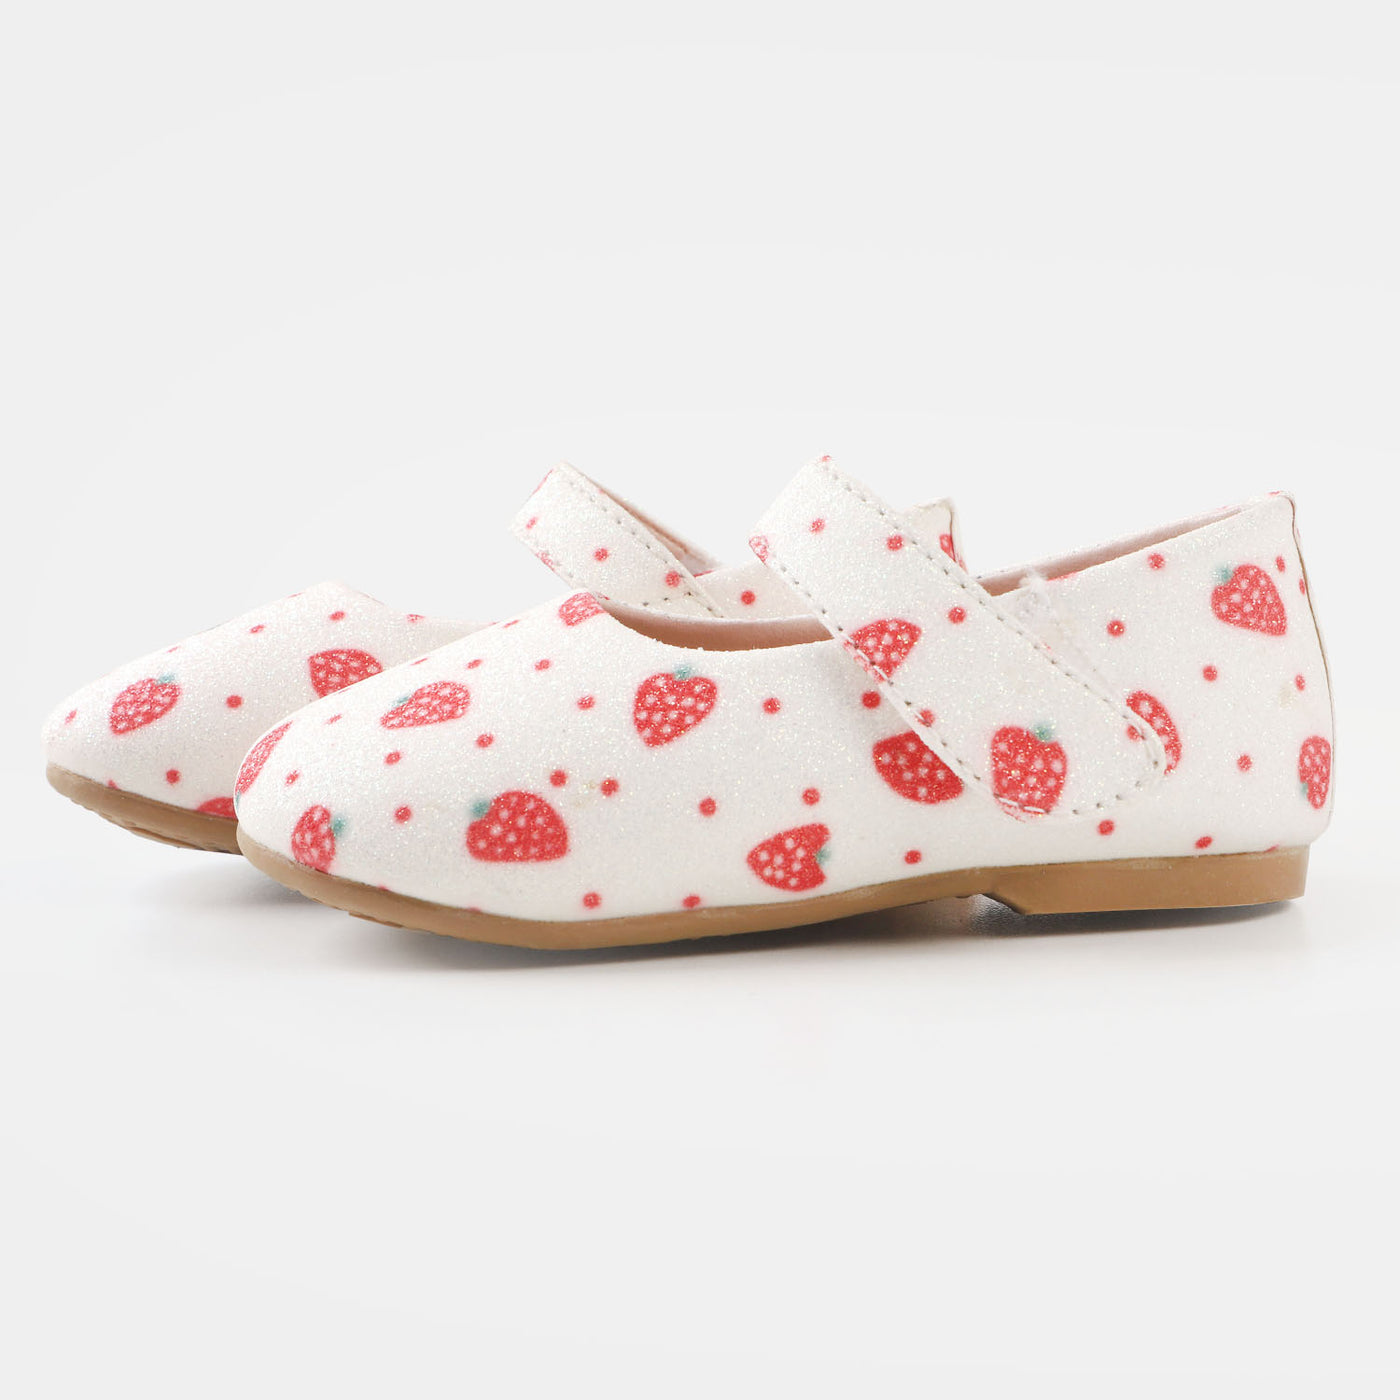 Girls Pumps PP 640-47  - White/Red